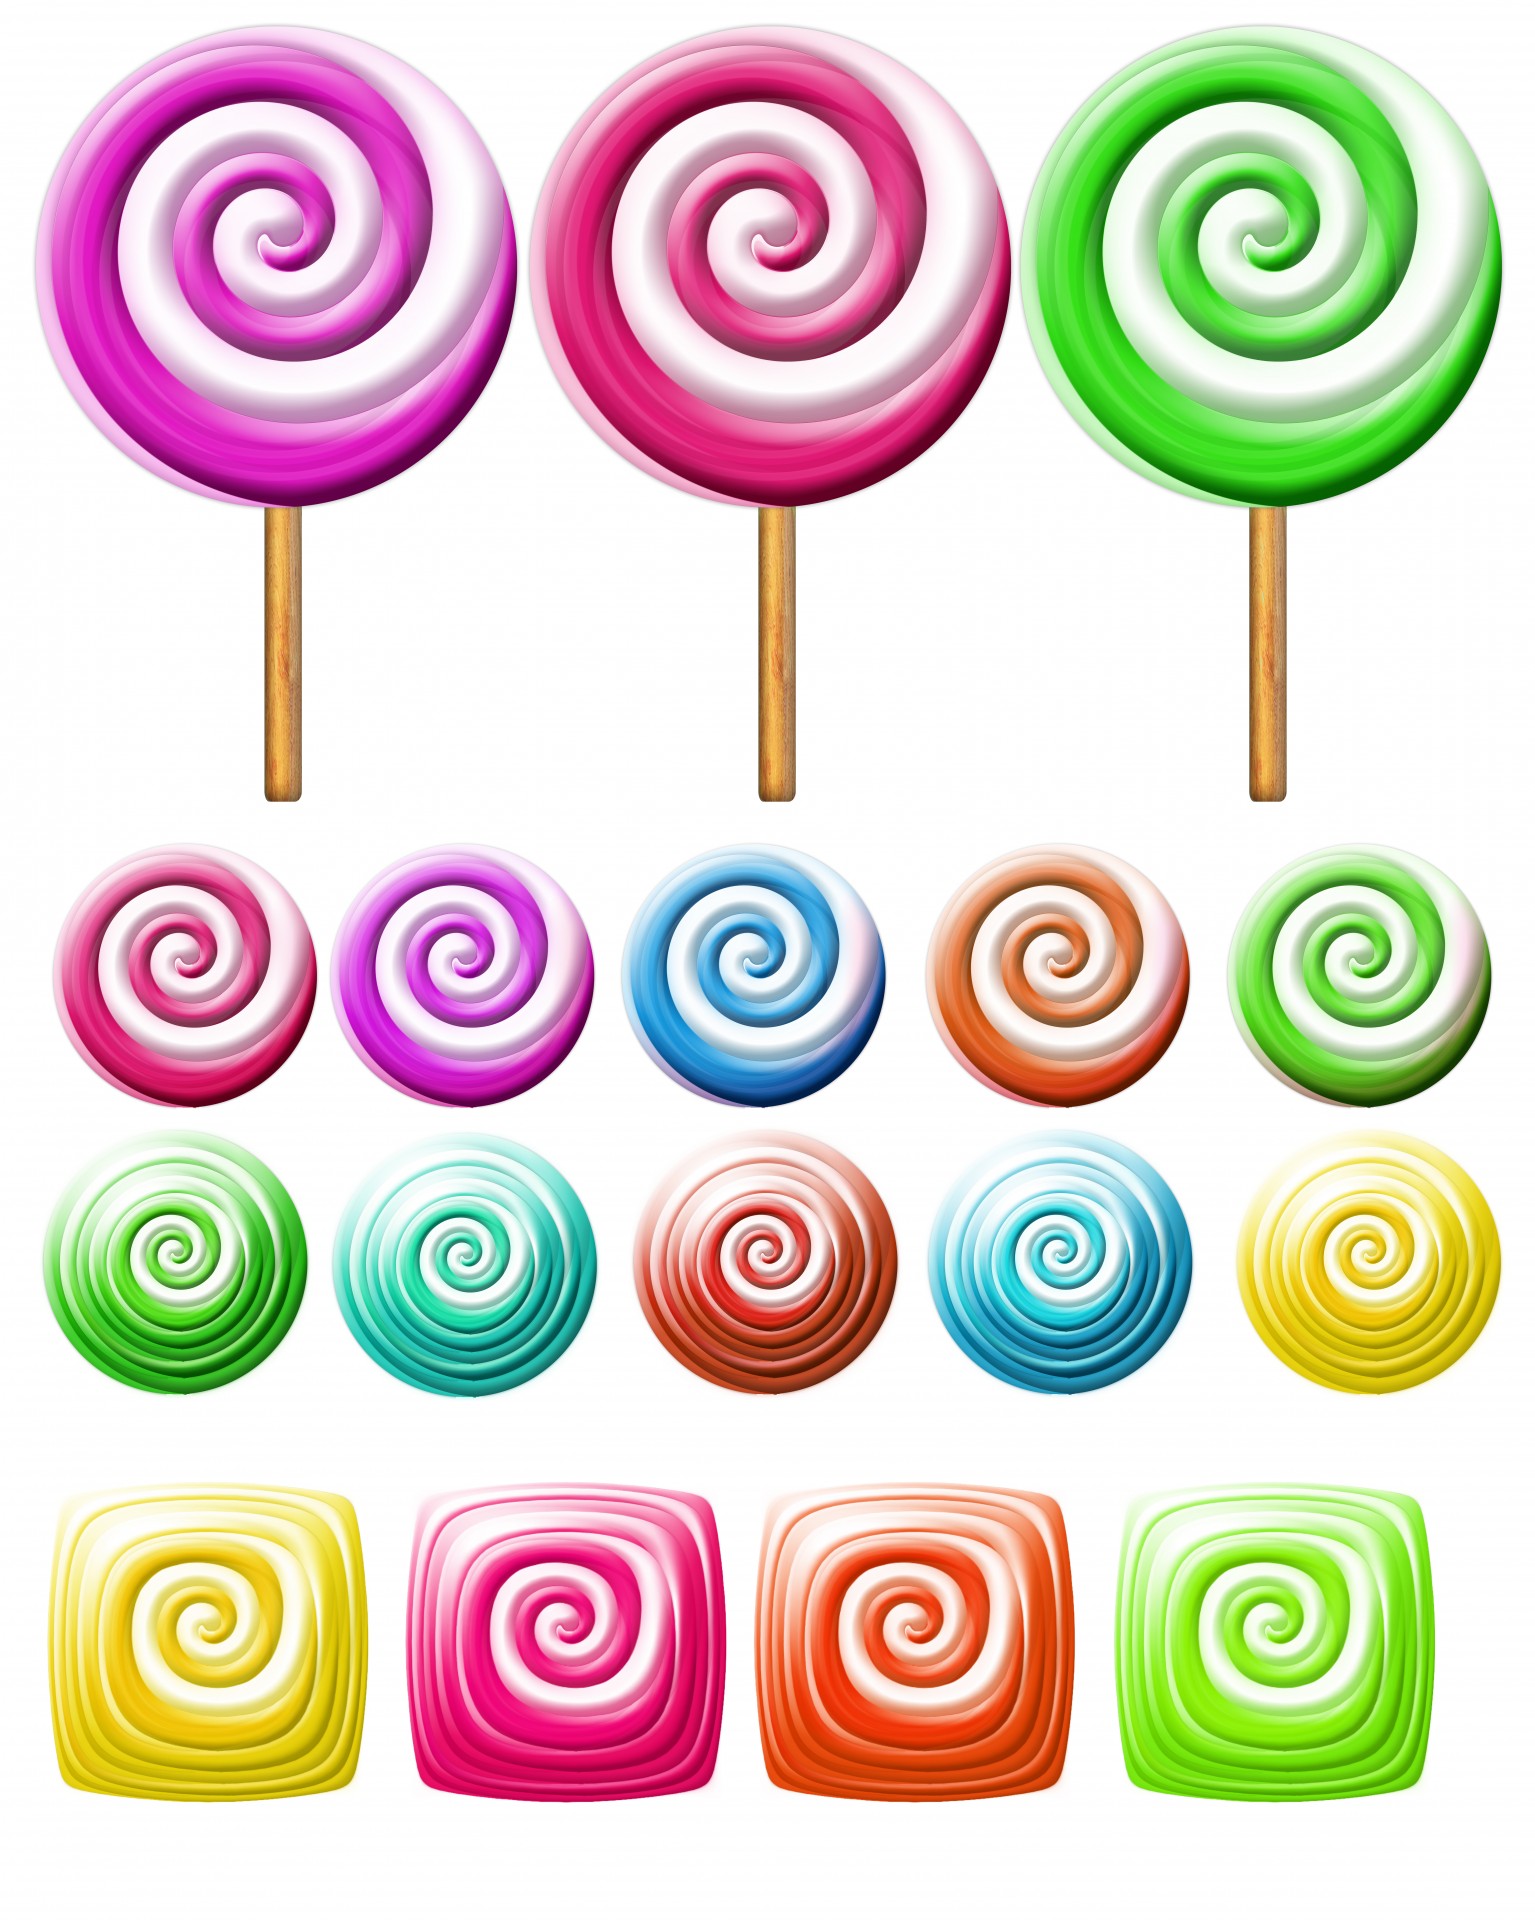 Bright lollipops icons over white background,clipart,candy